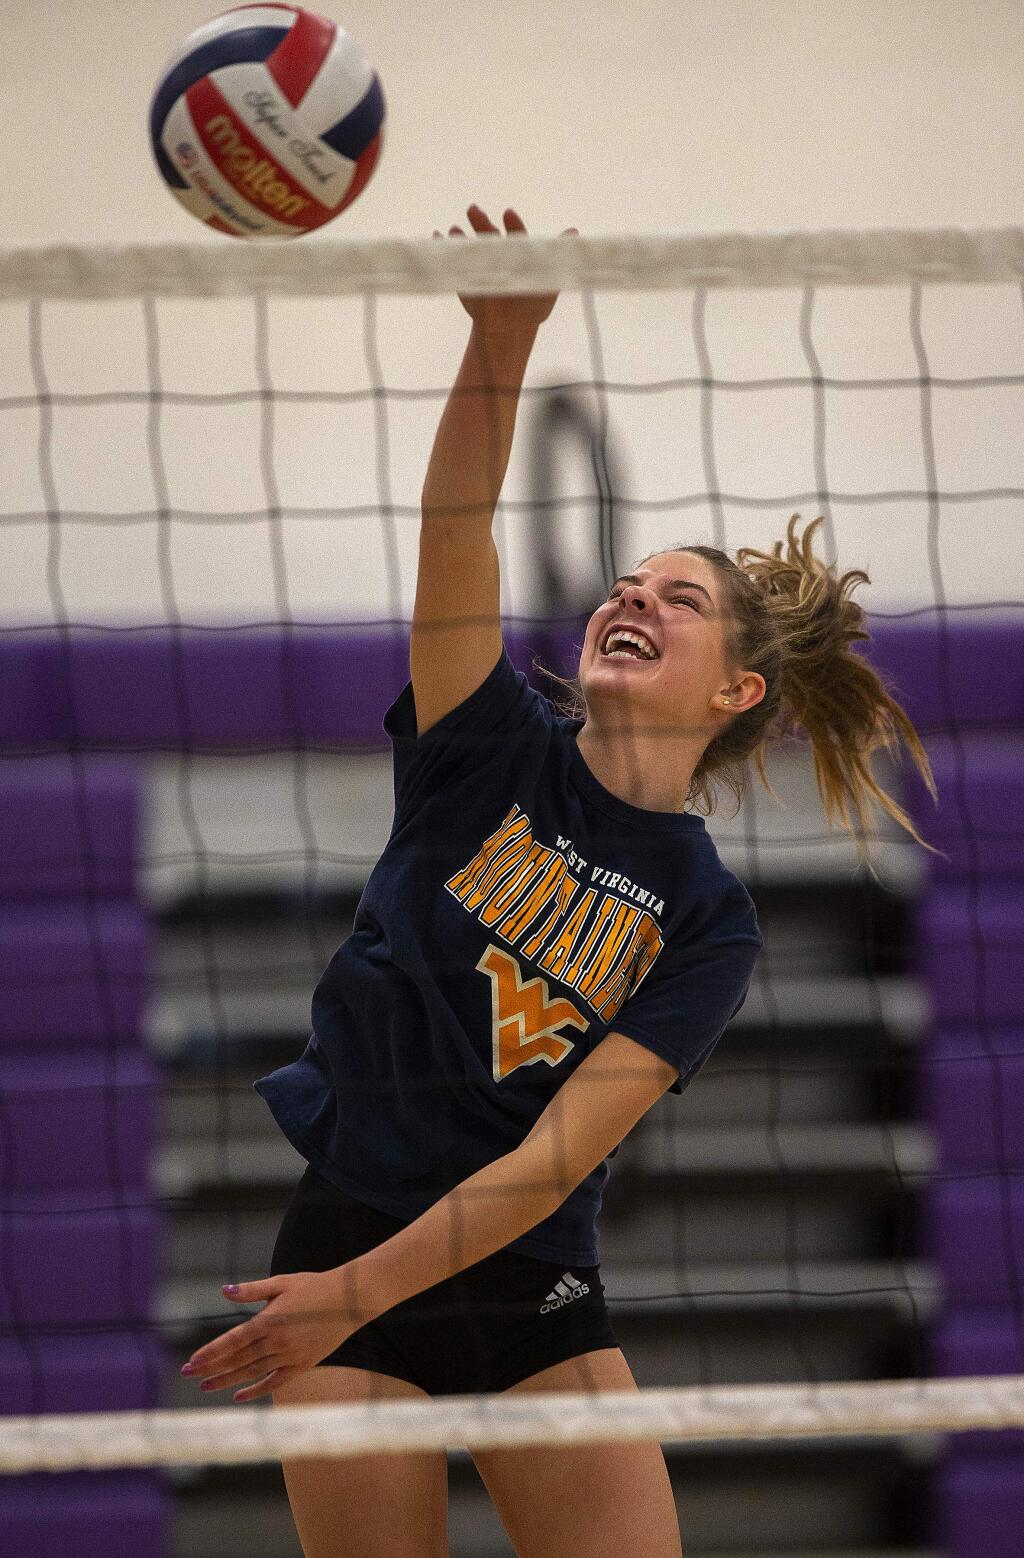 Petaluma High's Anna Hospodar spikes the ball during practice on Tuesday. Petaluma plays No. 1-ranked Branson Wednesday in the semifinals of the Division 3 NCS volleyball tournament. (John Burgess / The Press Democrat)